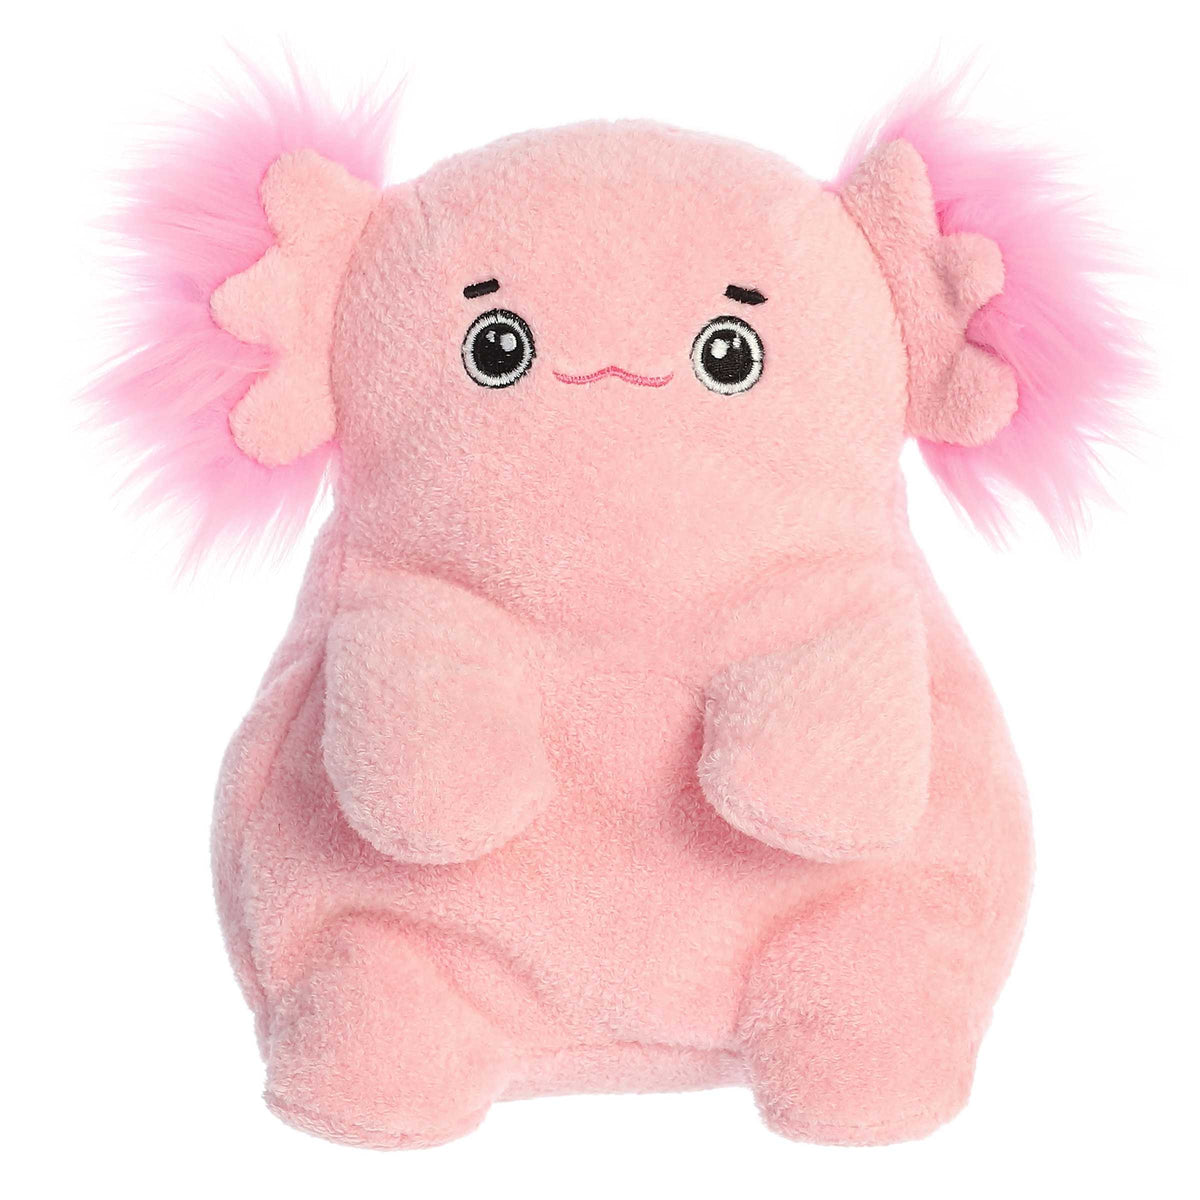 Ax-Olotl from Fluffles, a pink plush axolotl with a friendly face, offering softness and lovable charm.